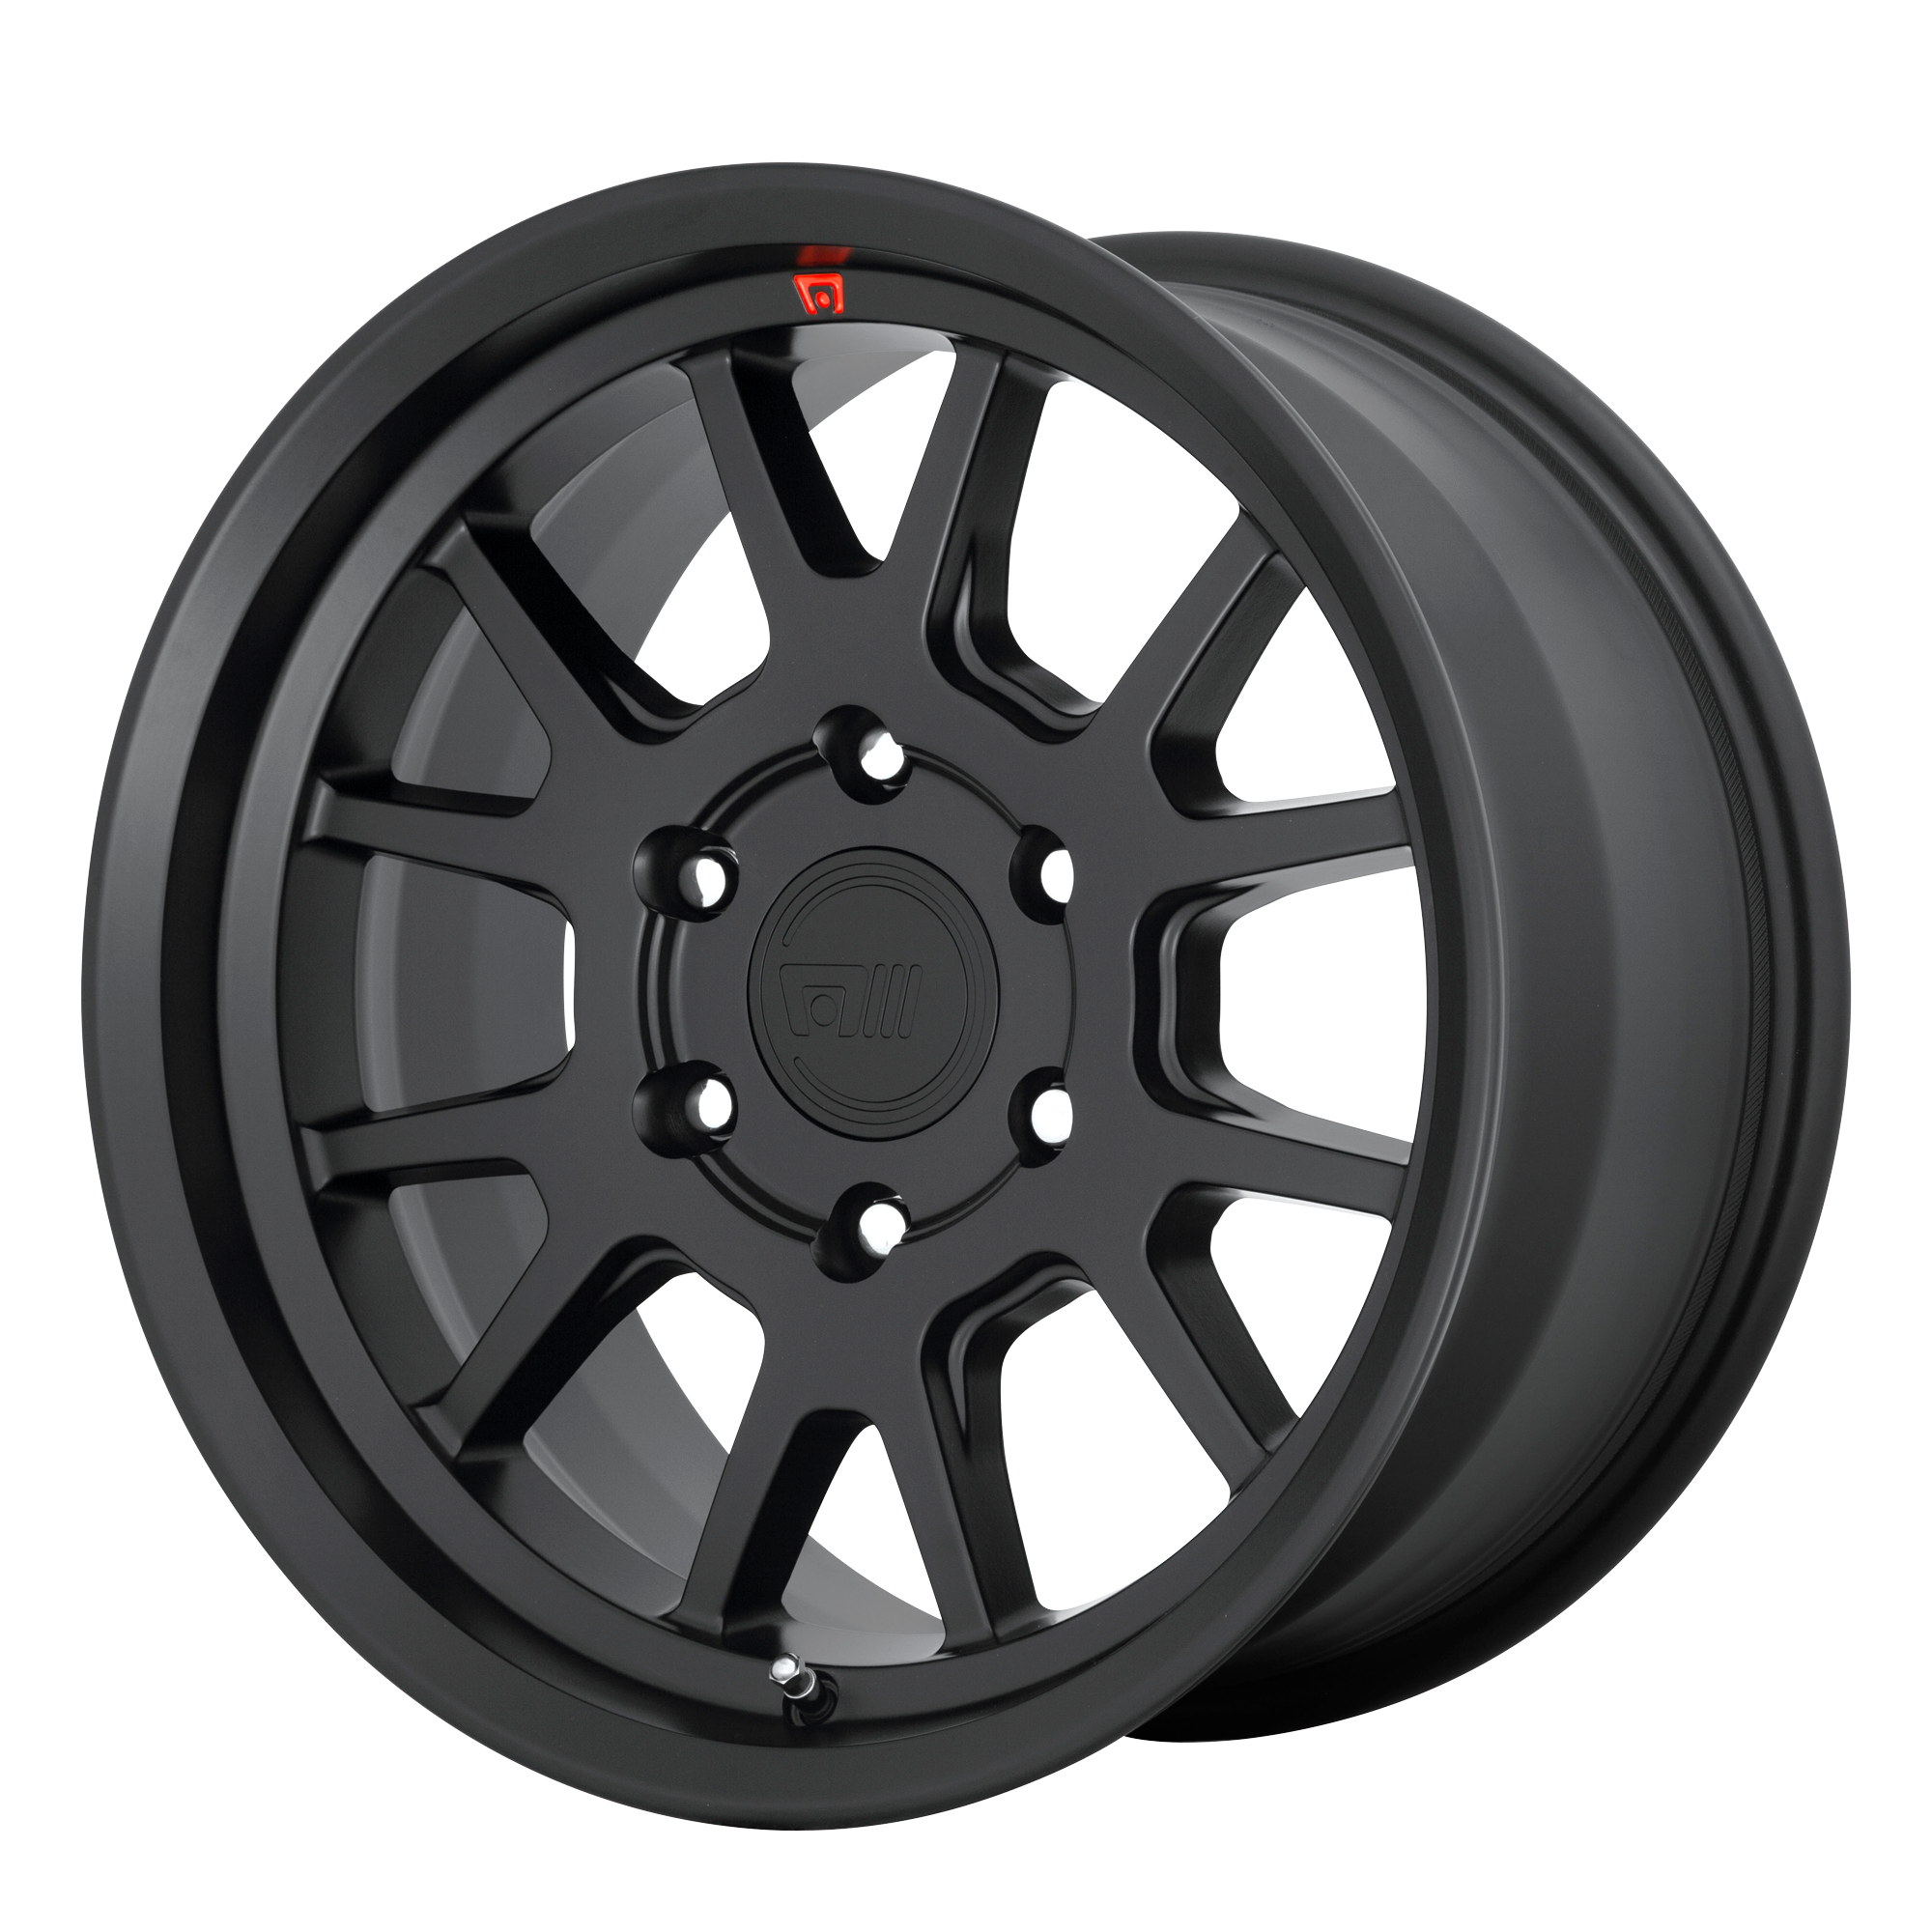 MT6 17x8.5 6x135.00 SATIN BLACK (0 mm) - Tires and Engine Performance